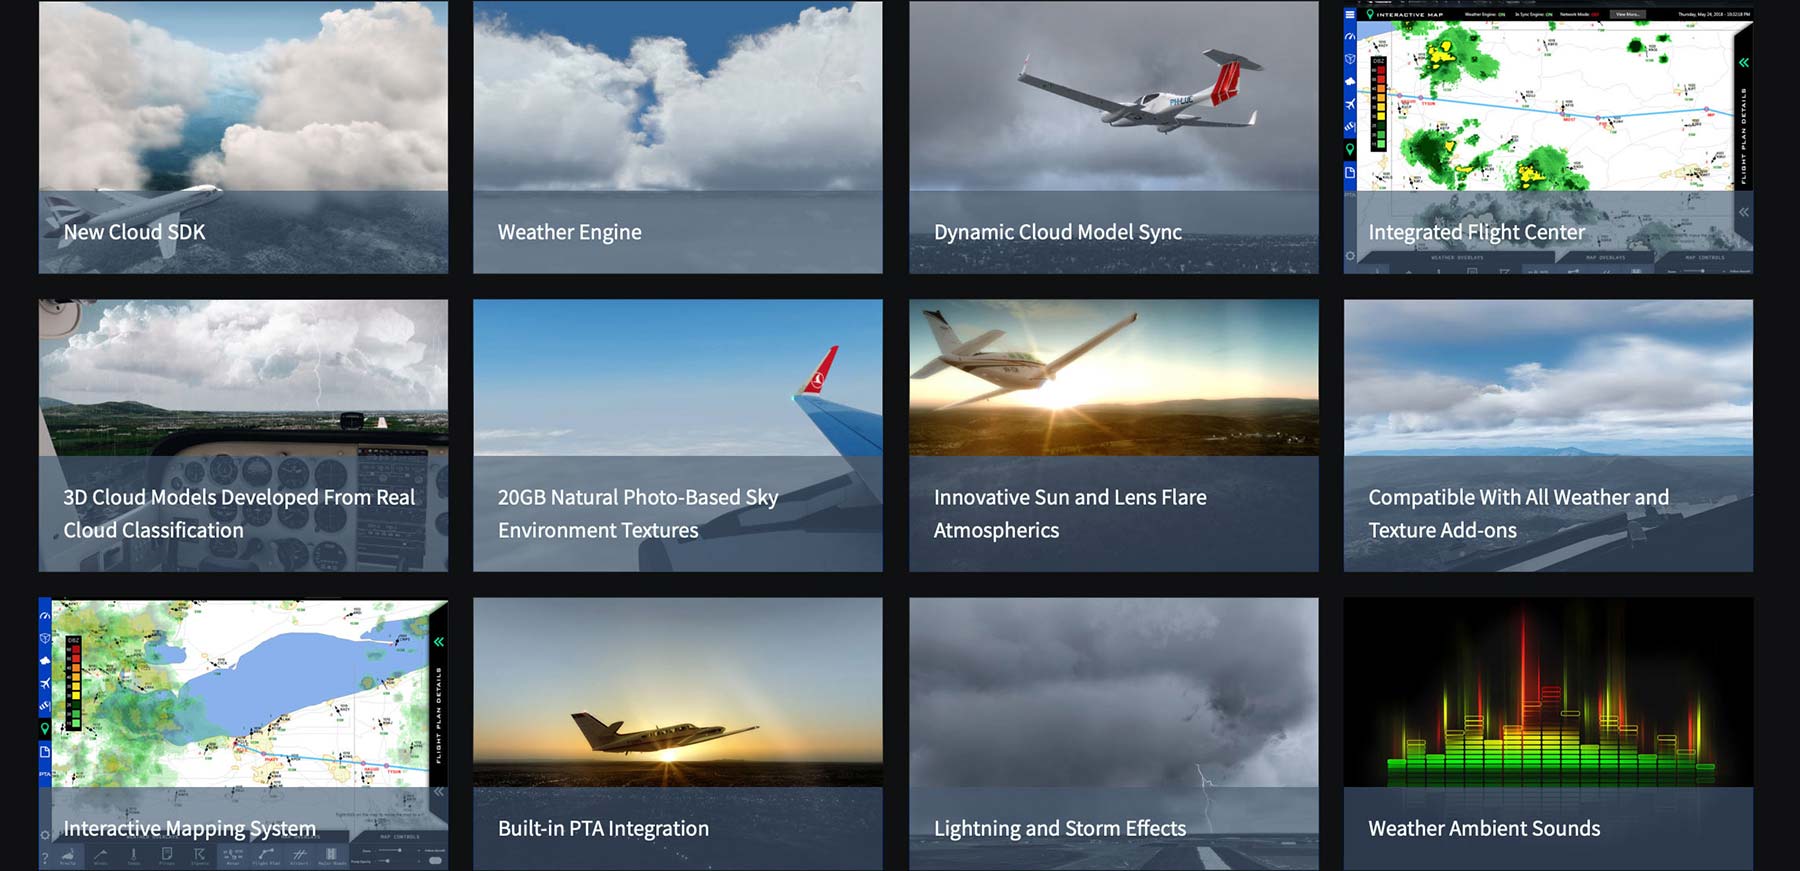 Clouds, weather engine, texture sync, flight center, sun add-on, PTA and environment sounds